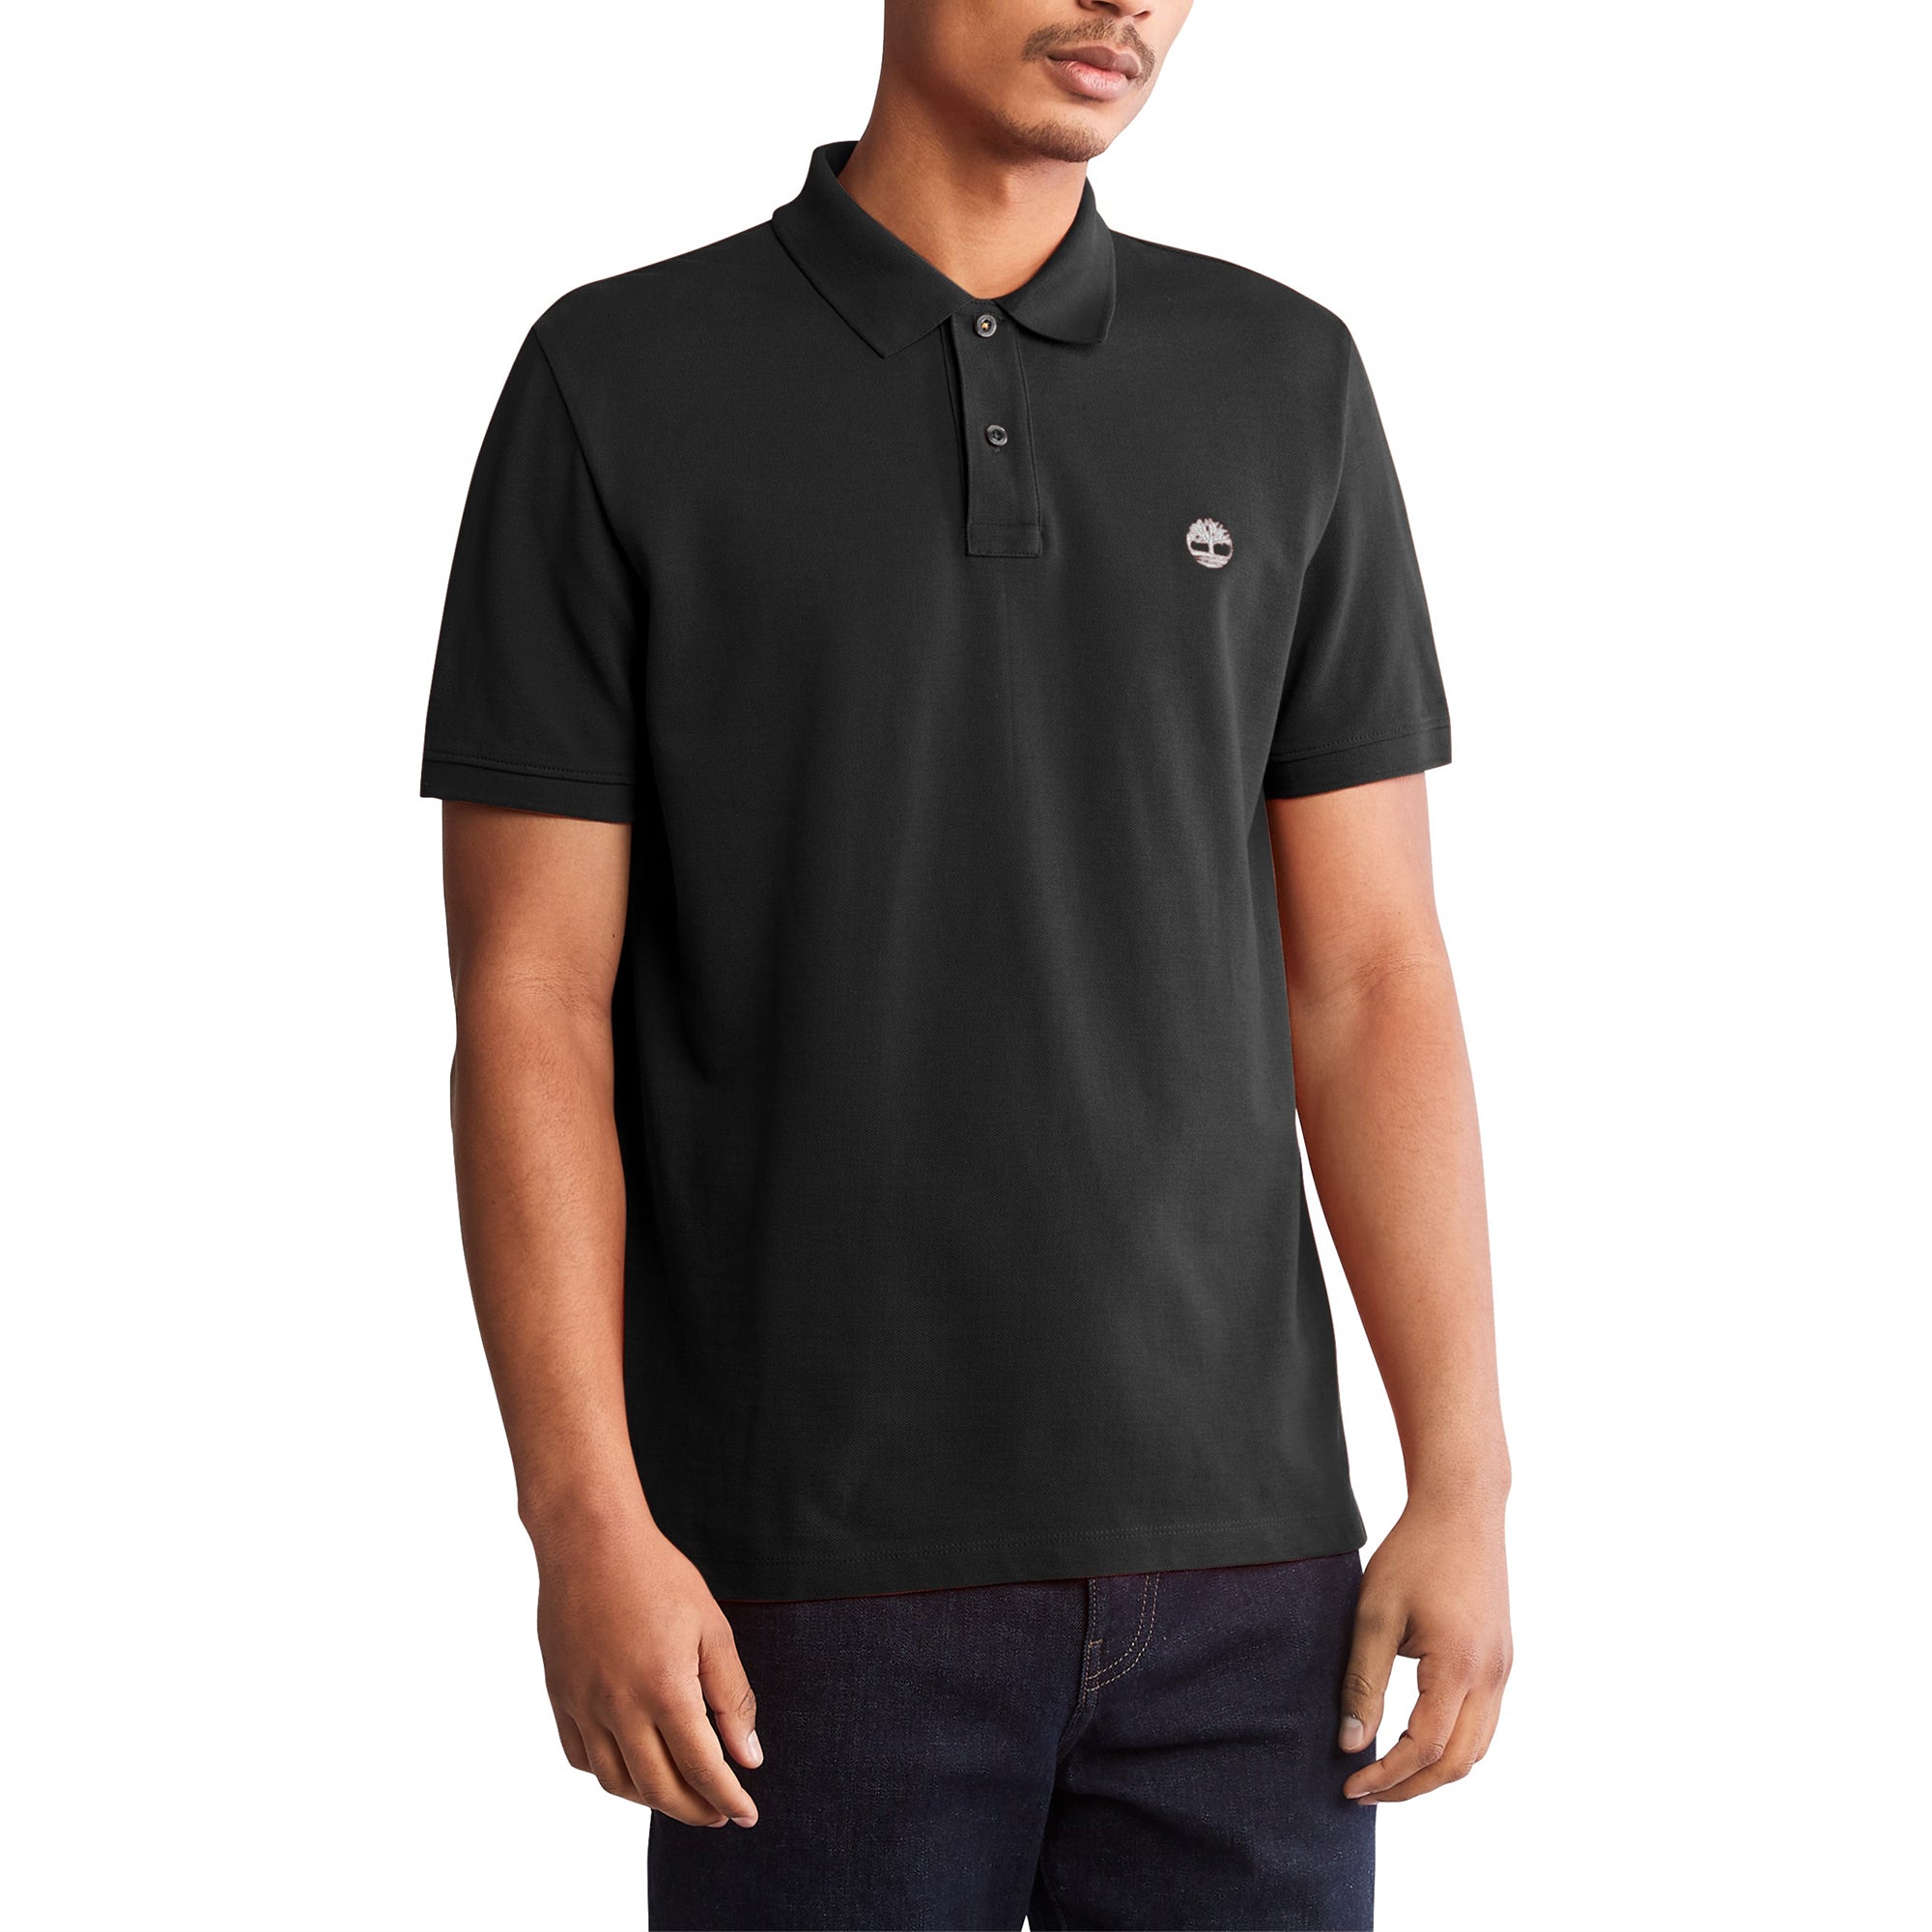 Timberland Millers River Pique Polo - Black